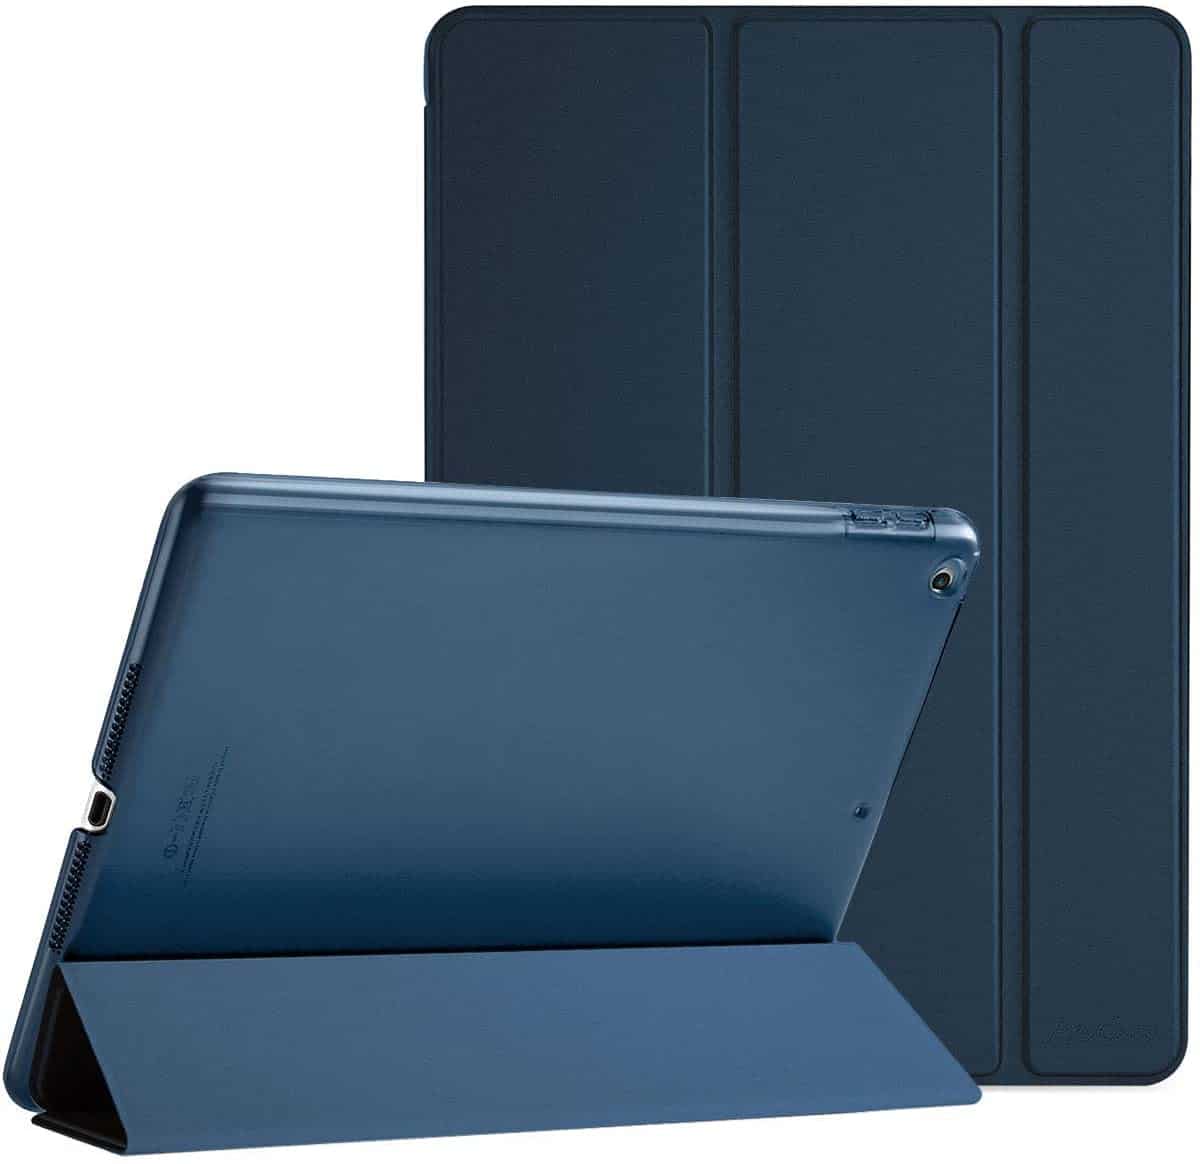 ProCase iPad 9.7 Case for 5th 6th Generation Review